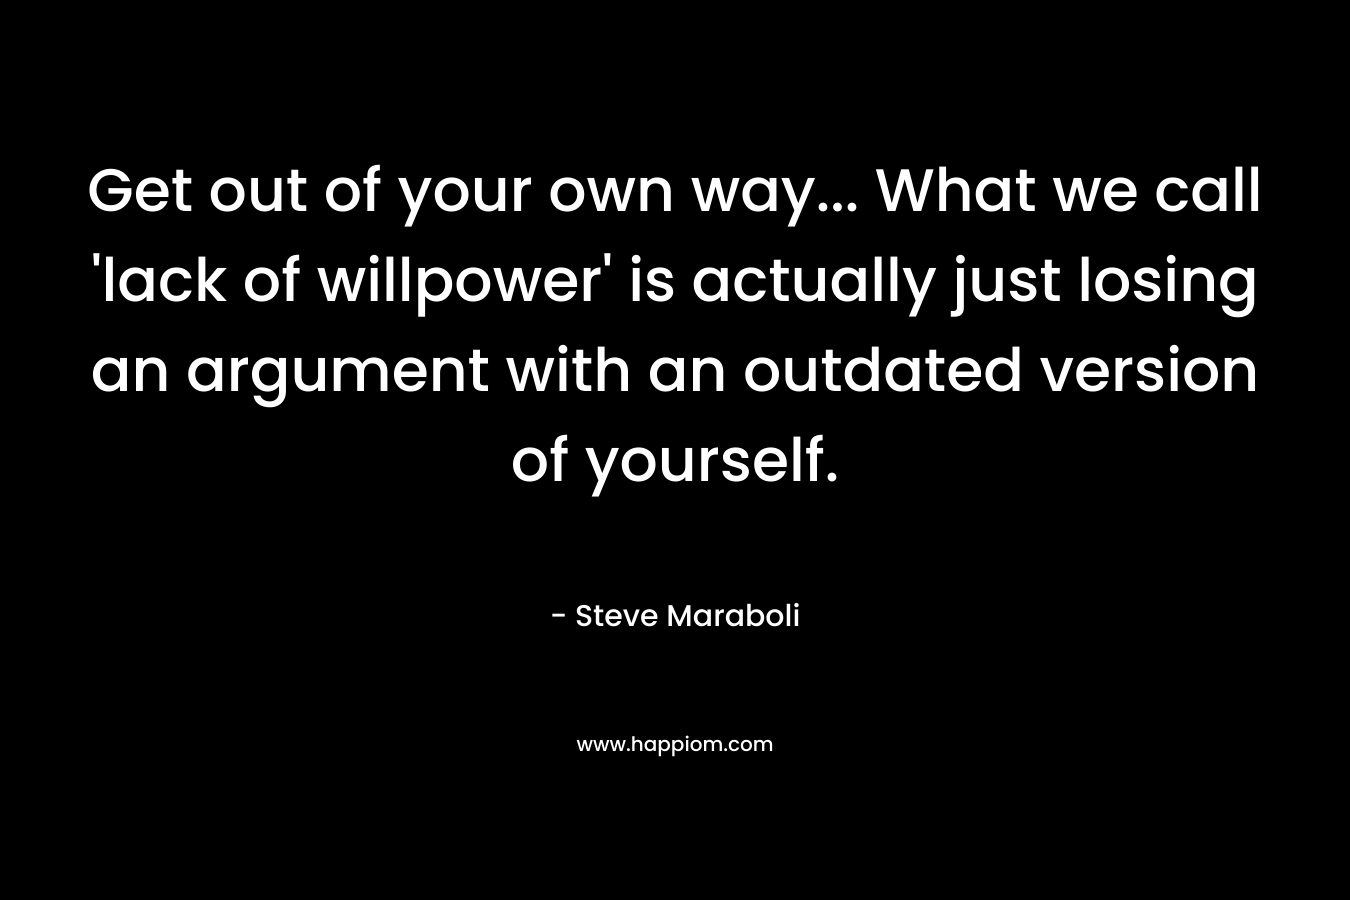 Get out of your own way… What we call ‘lack of willpower’ is actually just losing an argument with an outdated version of yourself. – Steve Maraboli